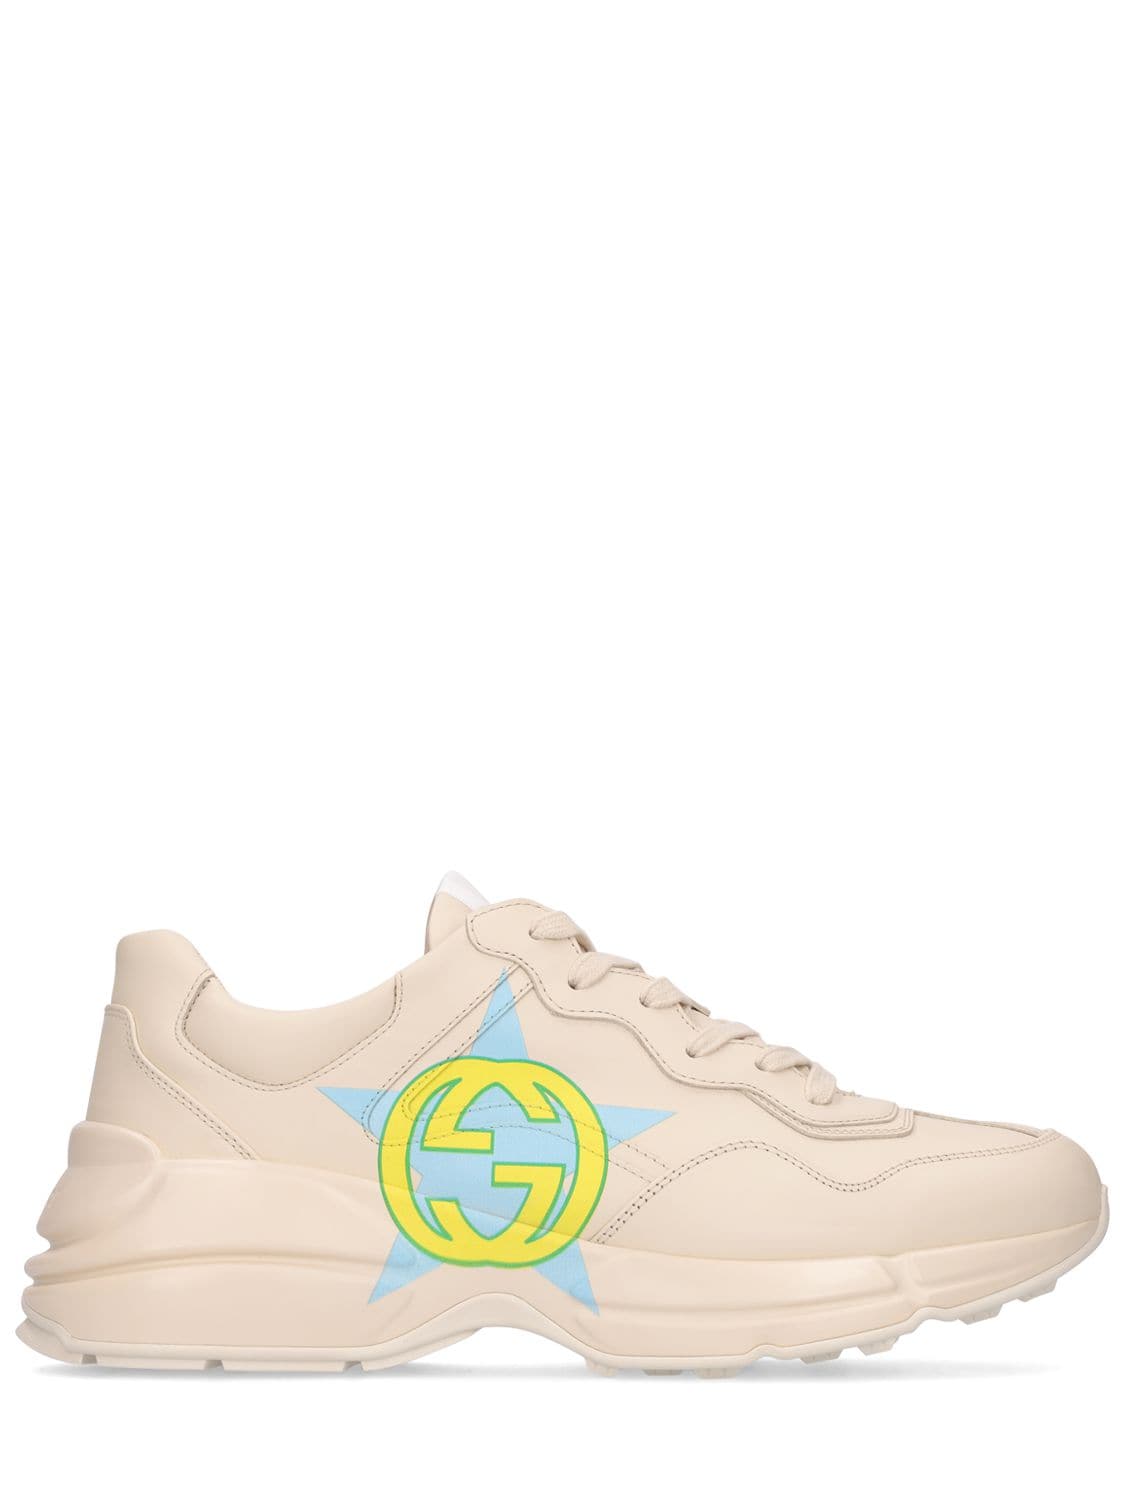 GUCCI Rhyton Star Print Leather Sneakers